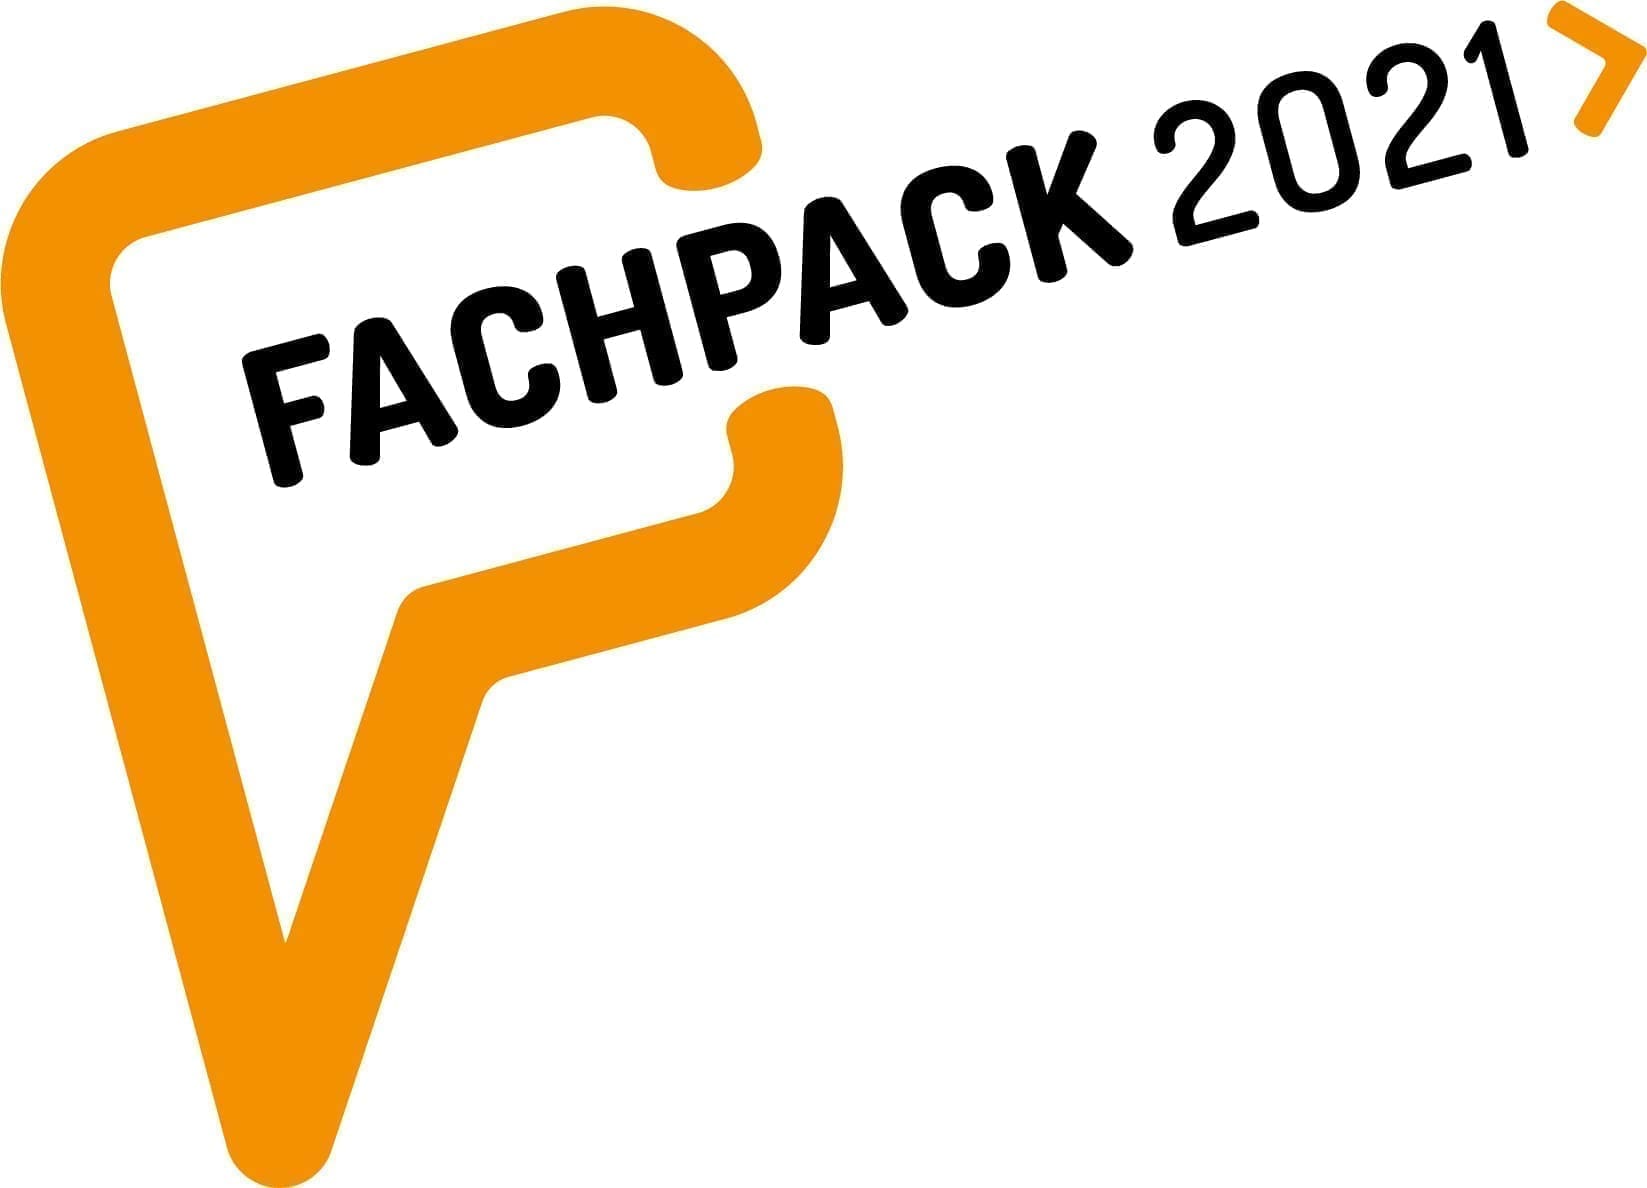 Fachpack 2021